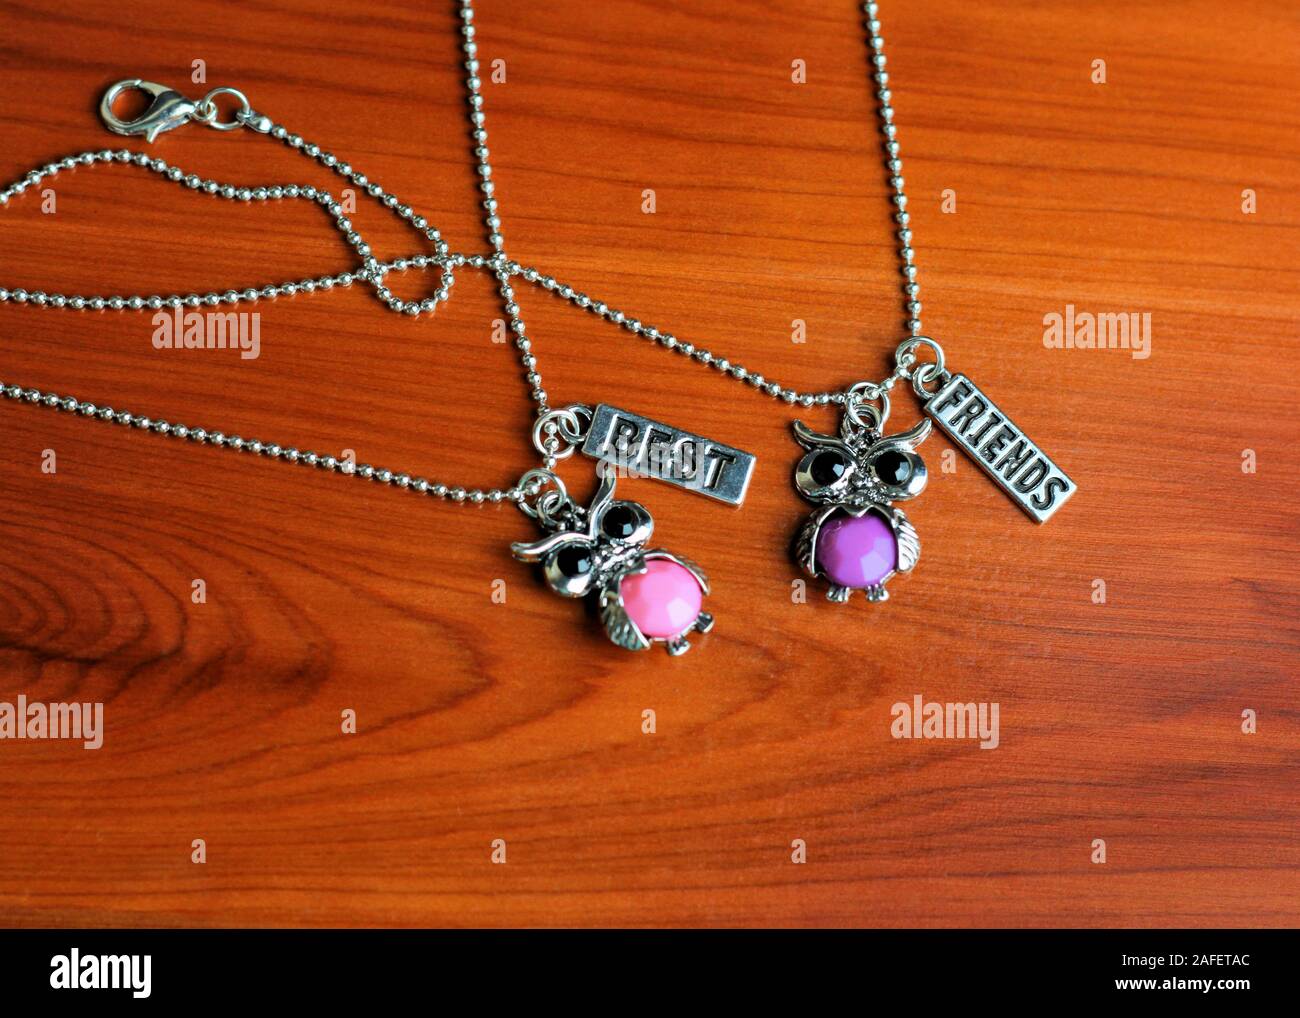 Two matching 'Best Friends' silver with pink and purple owl necklaces rest on a wood background. Stock Photo